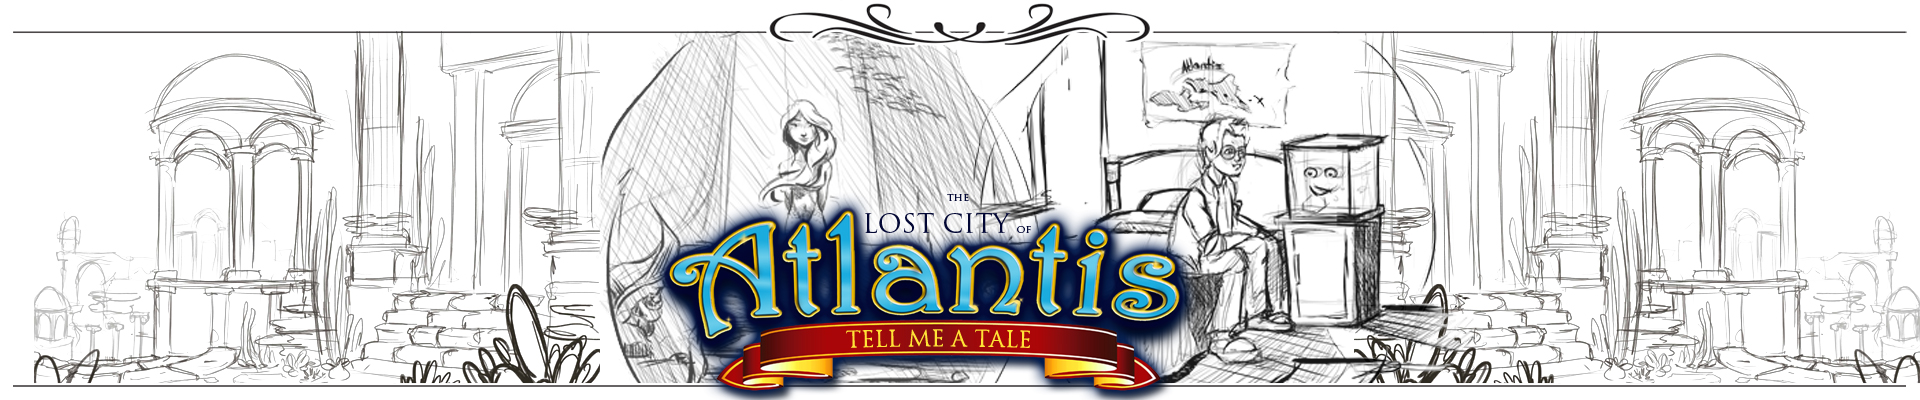 the Lost City of Atlantis - Tell me a Tale